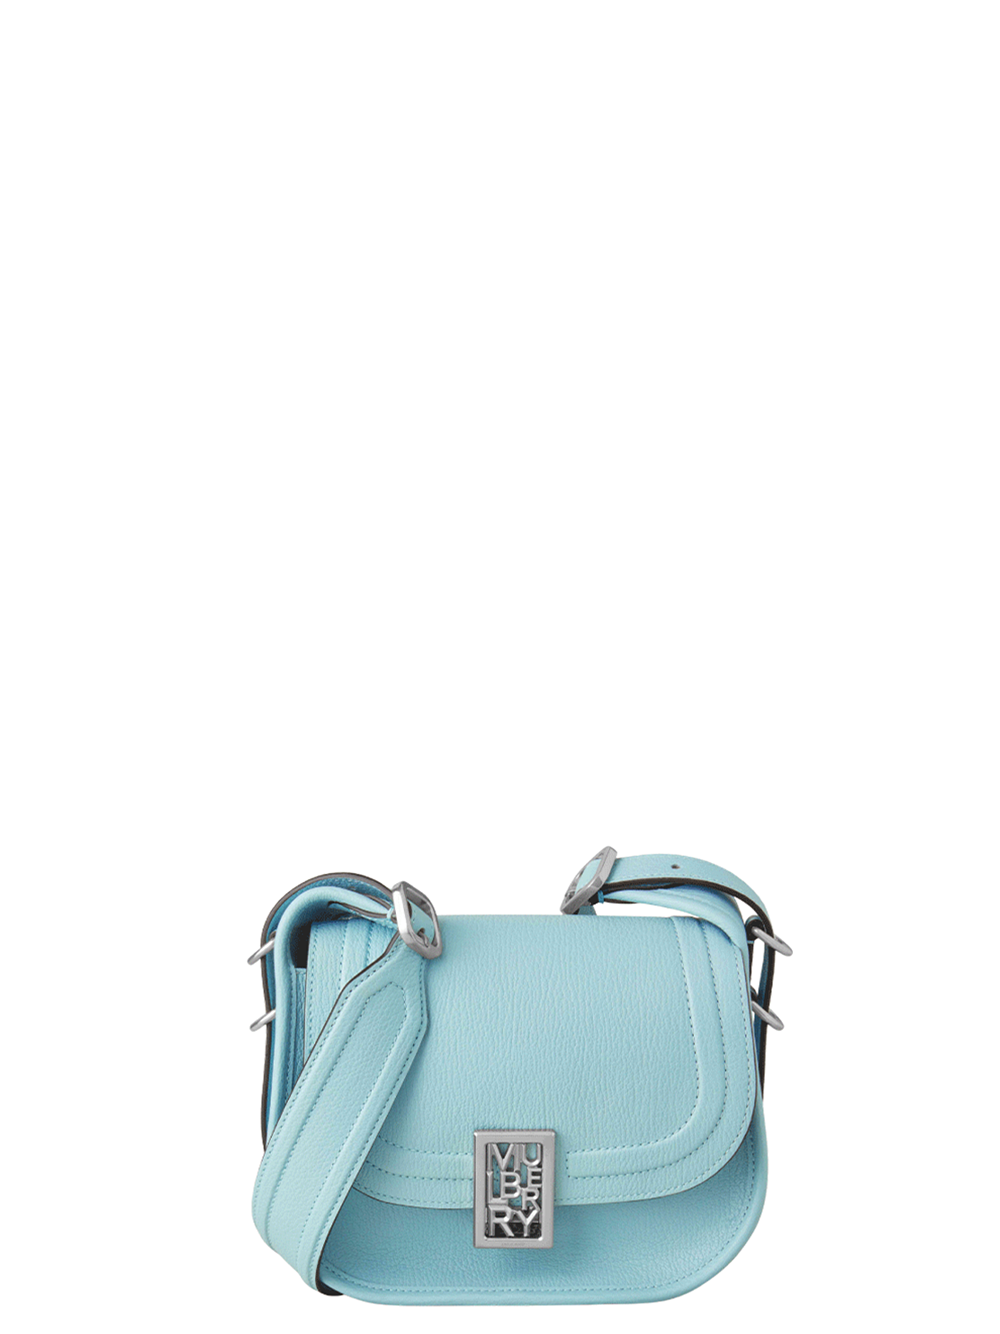 Mulberry Small Sadie Satchel Goat Print Turquoise 1